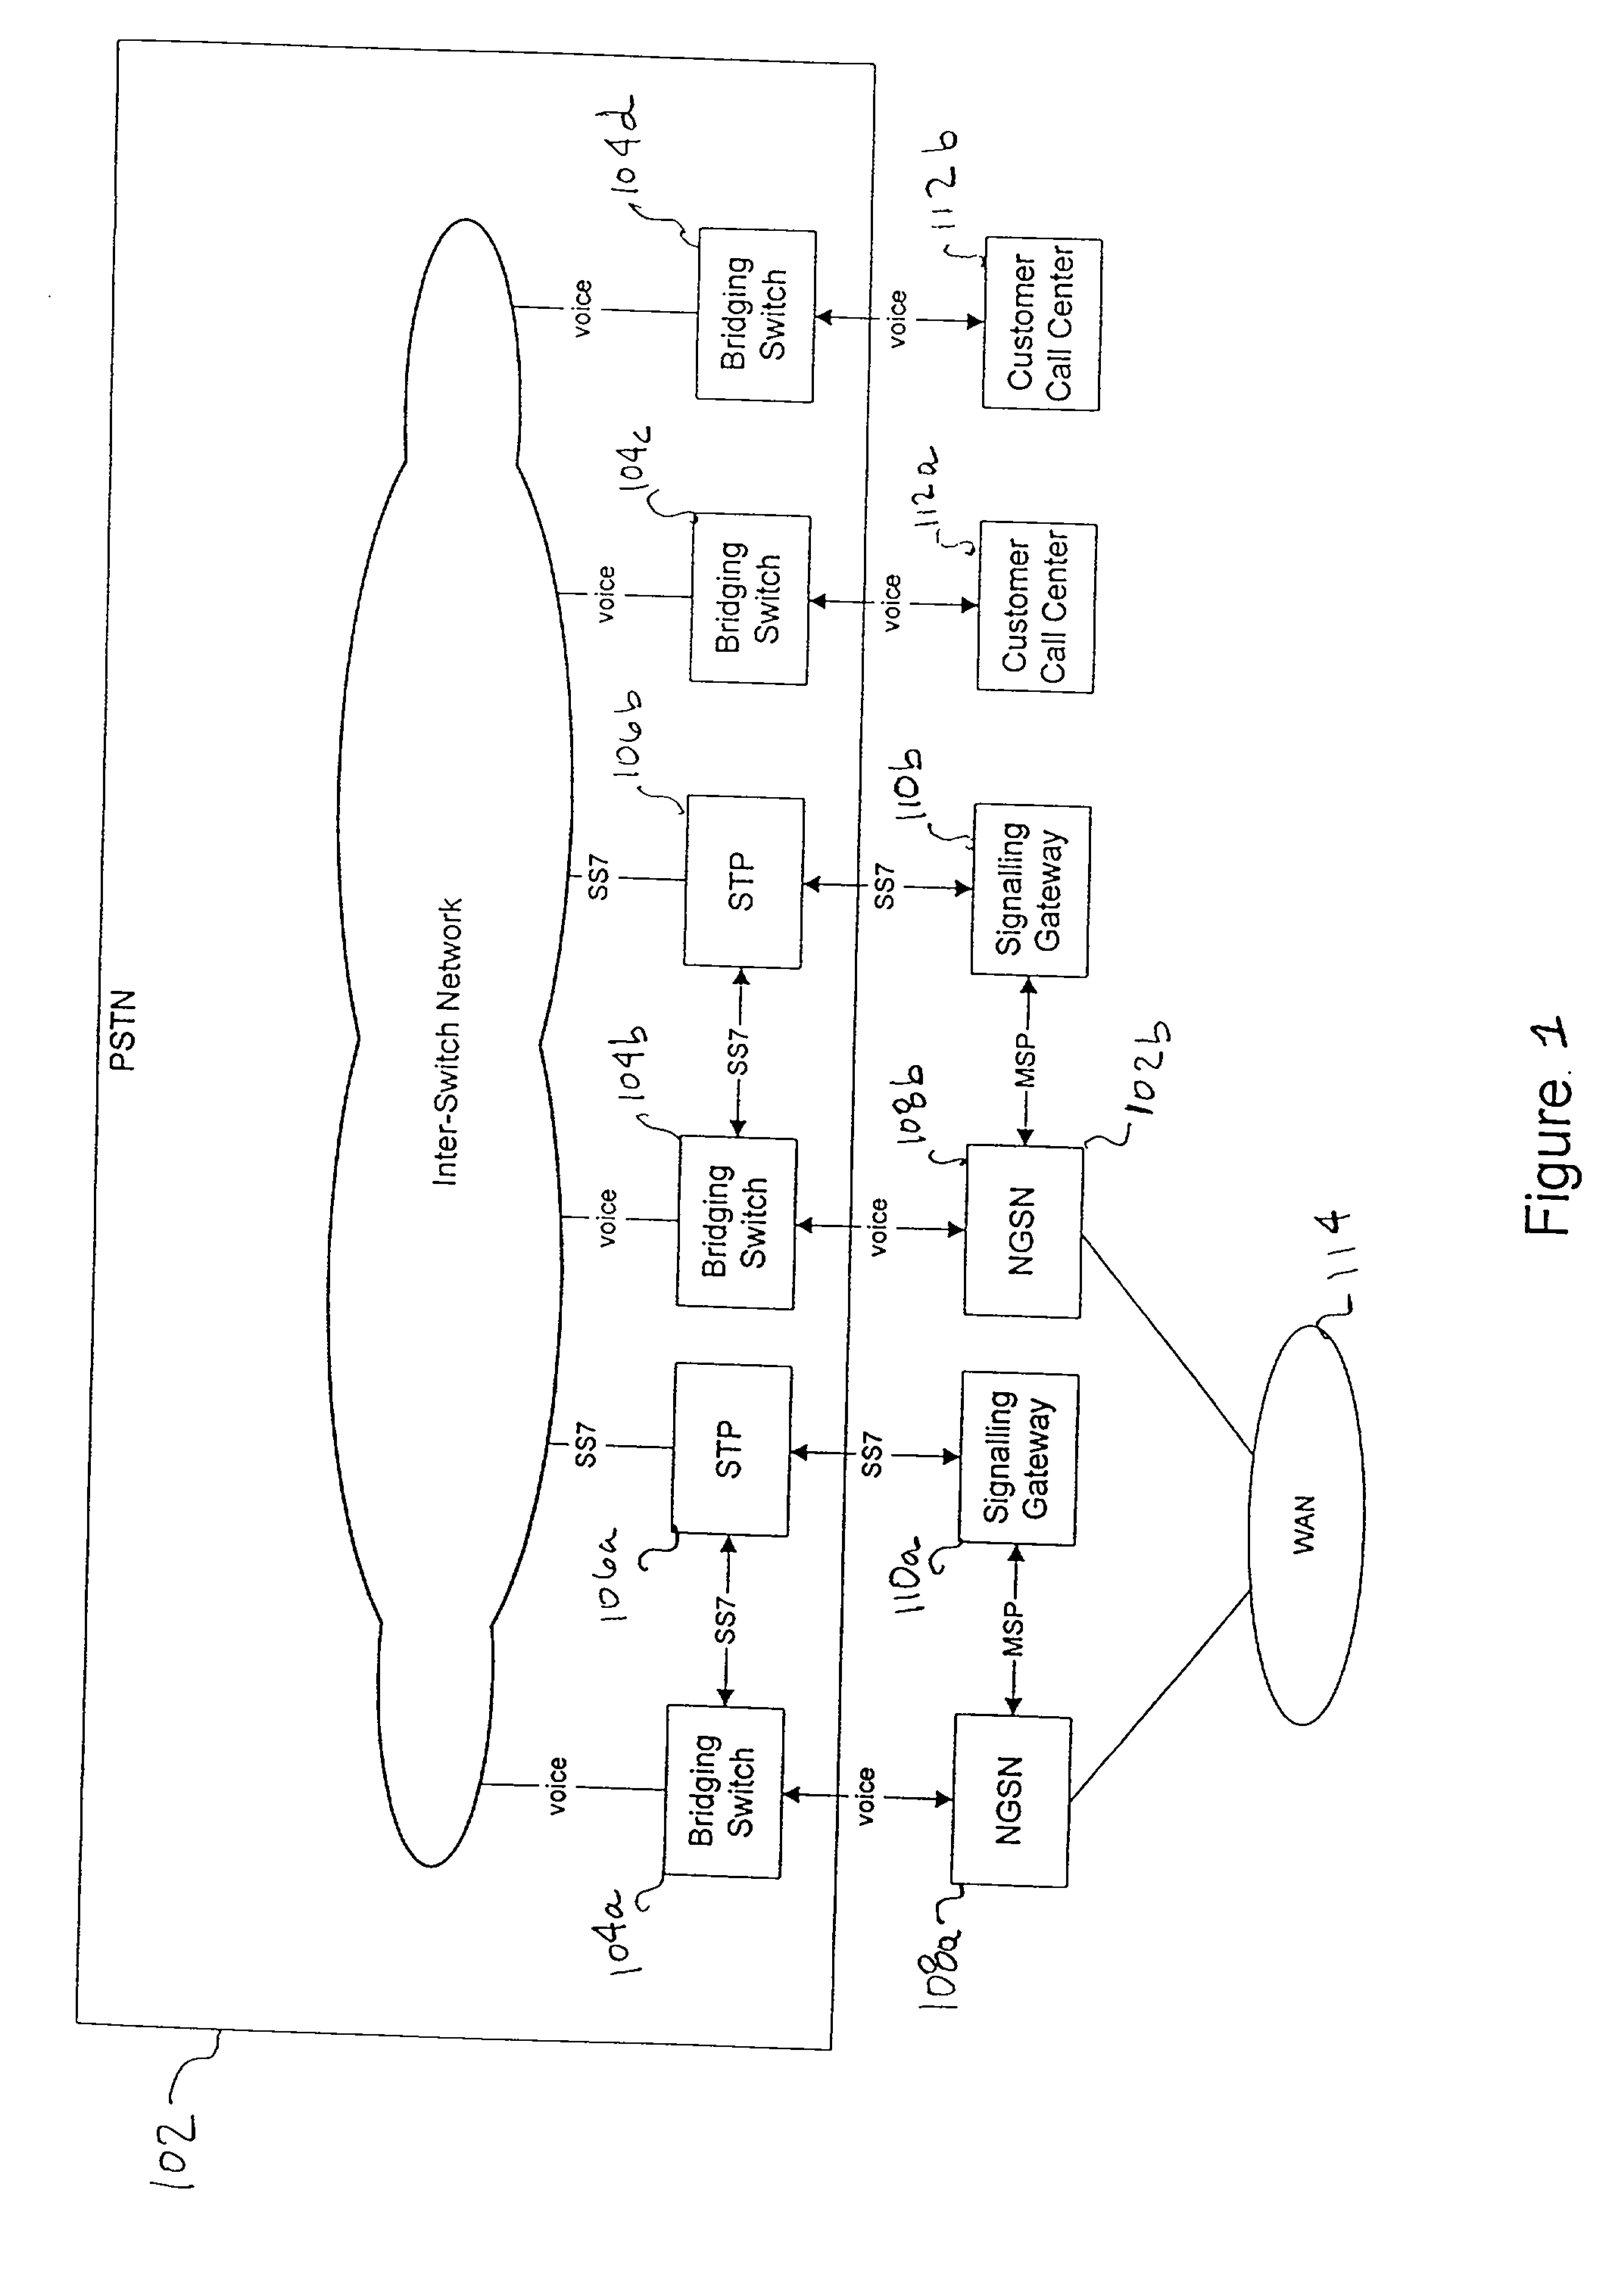 Communications signaling gateway and system for an advanced service node